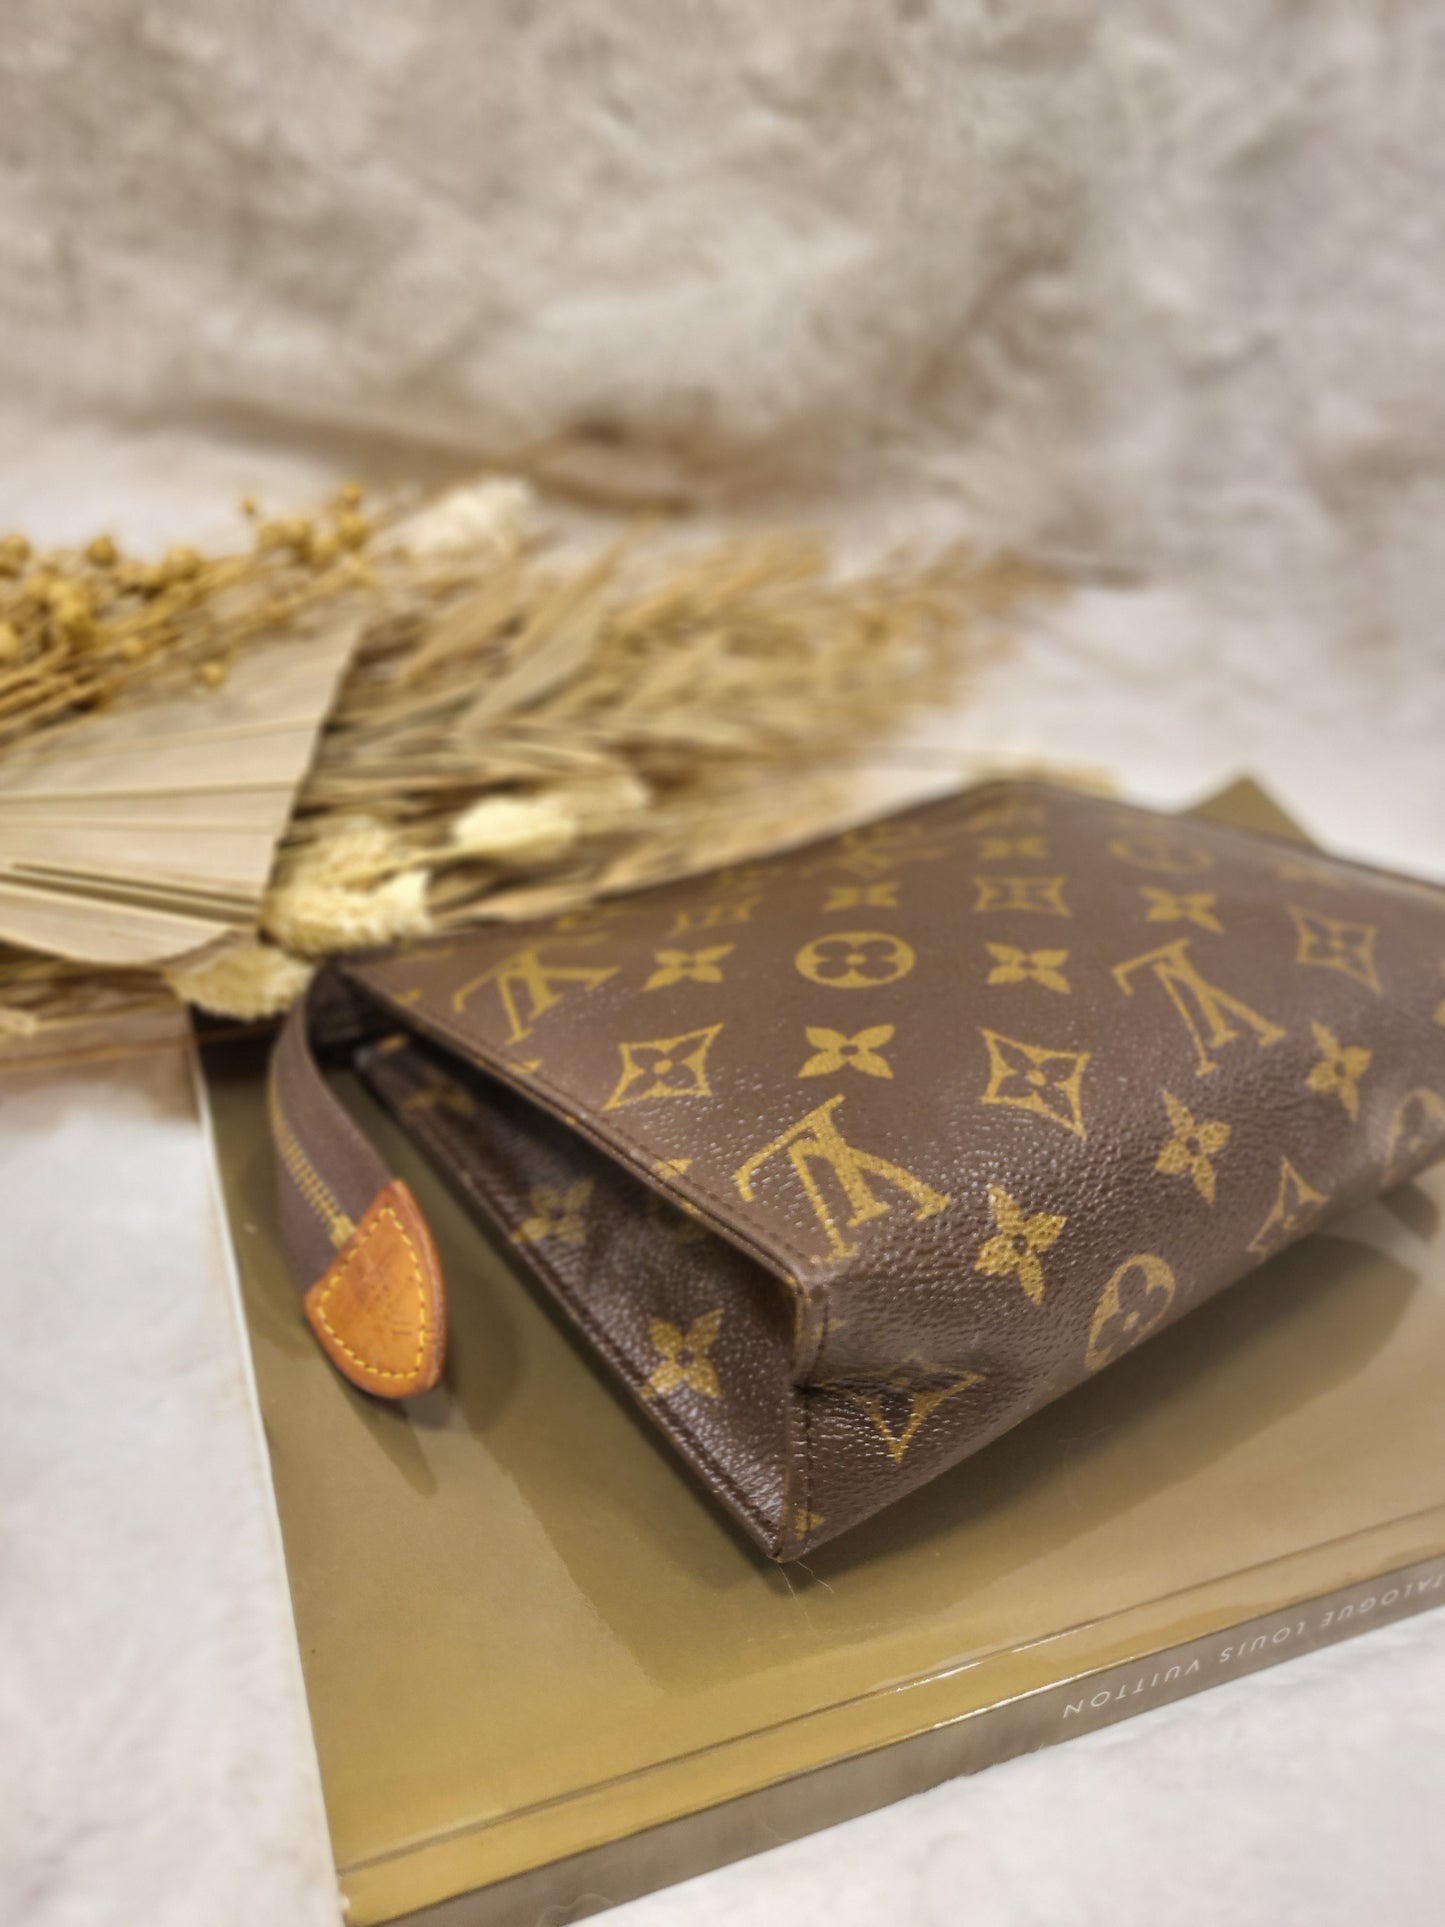 Authentic pre-owned Louis Vuitton toiletry 19 make up bag